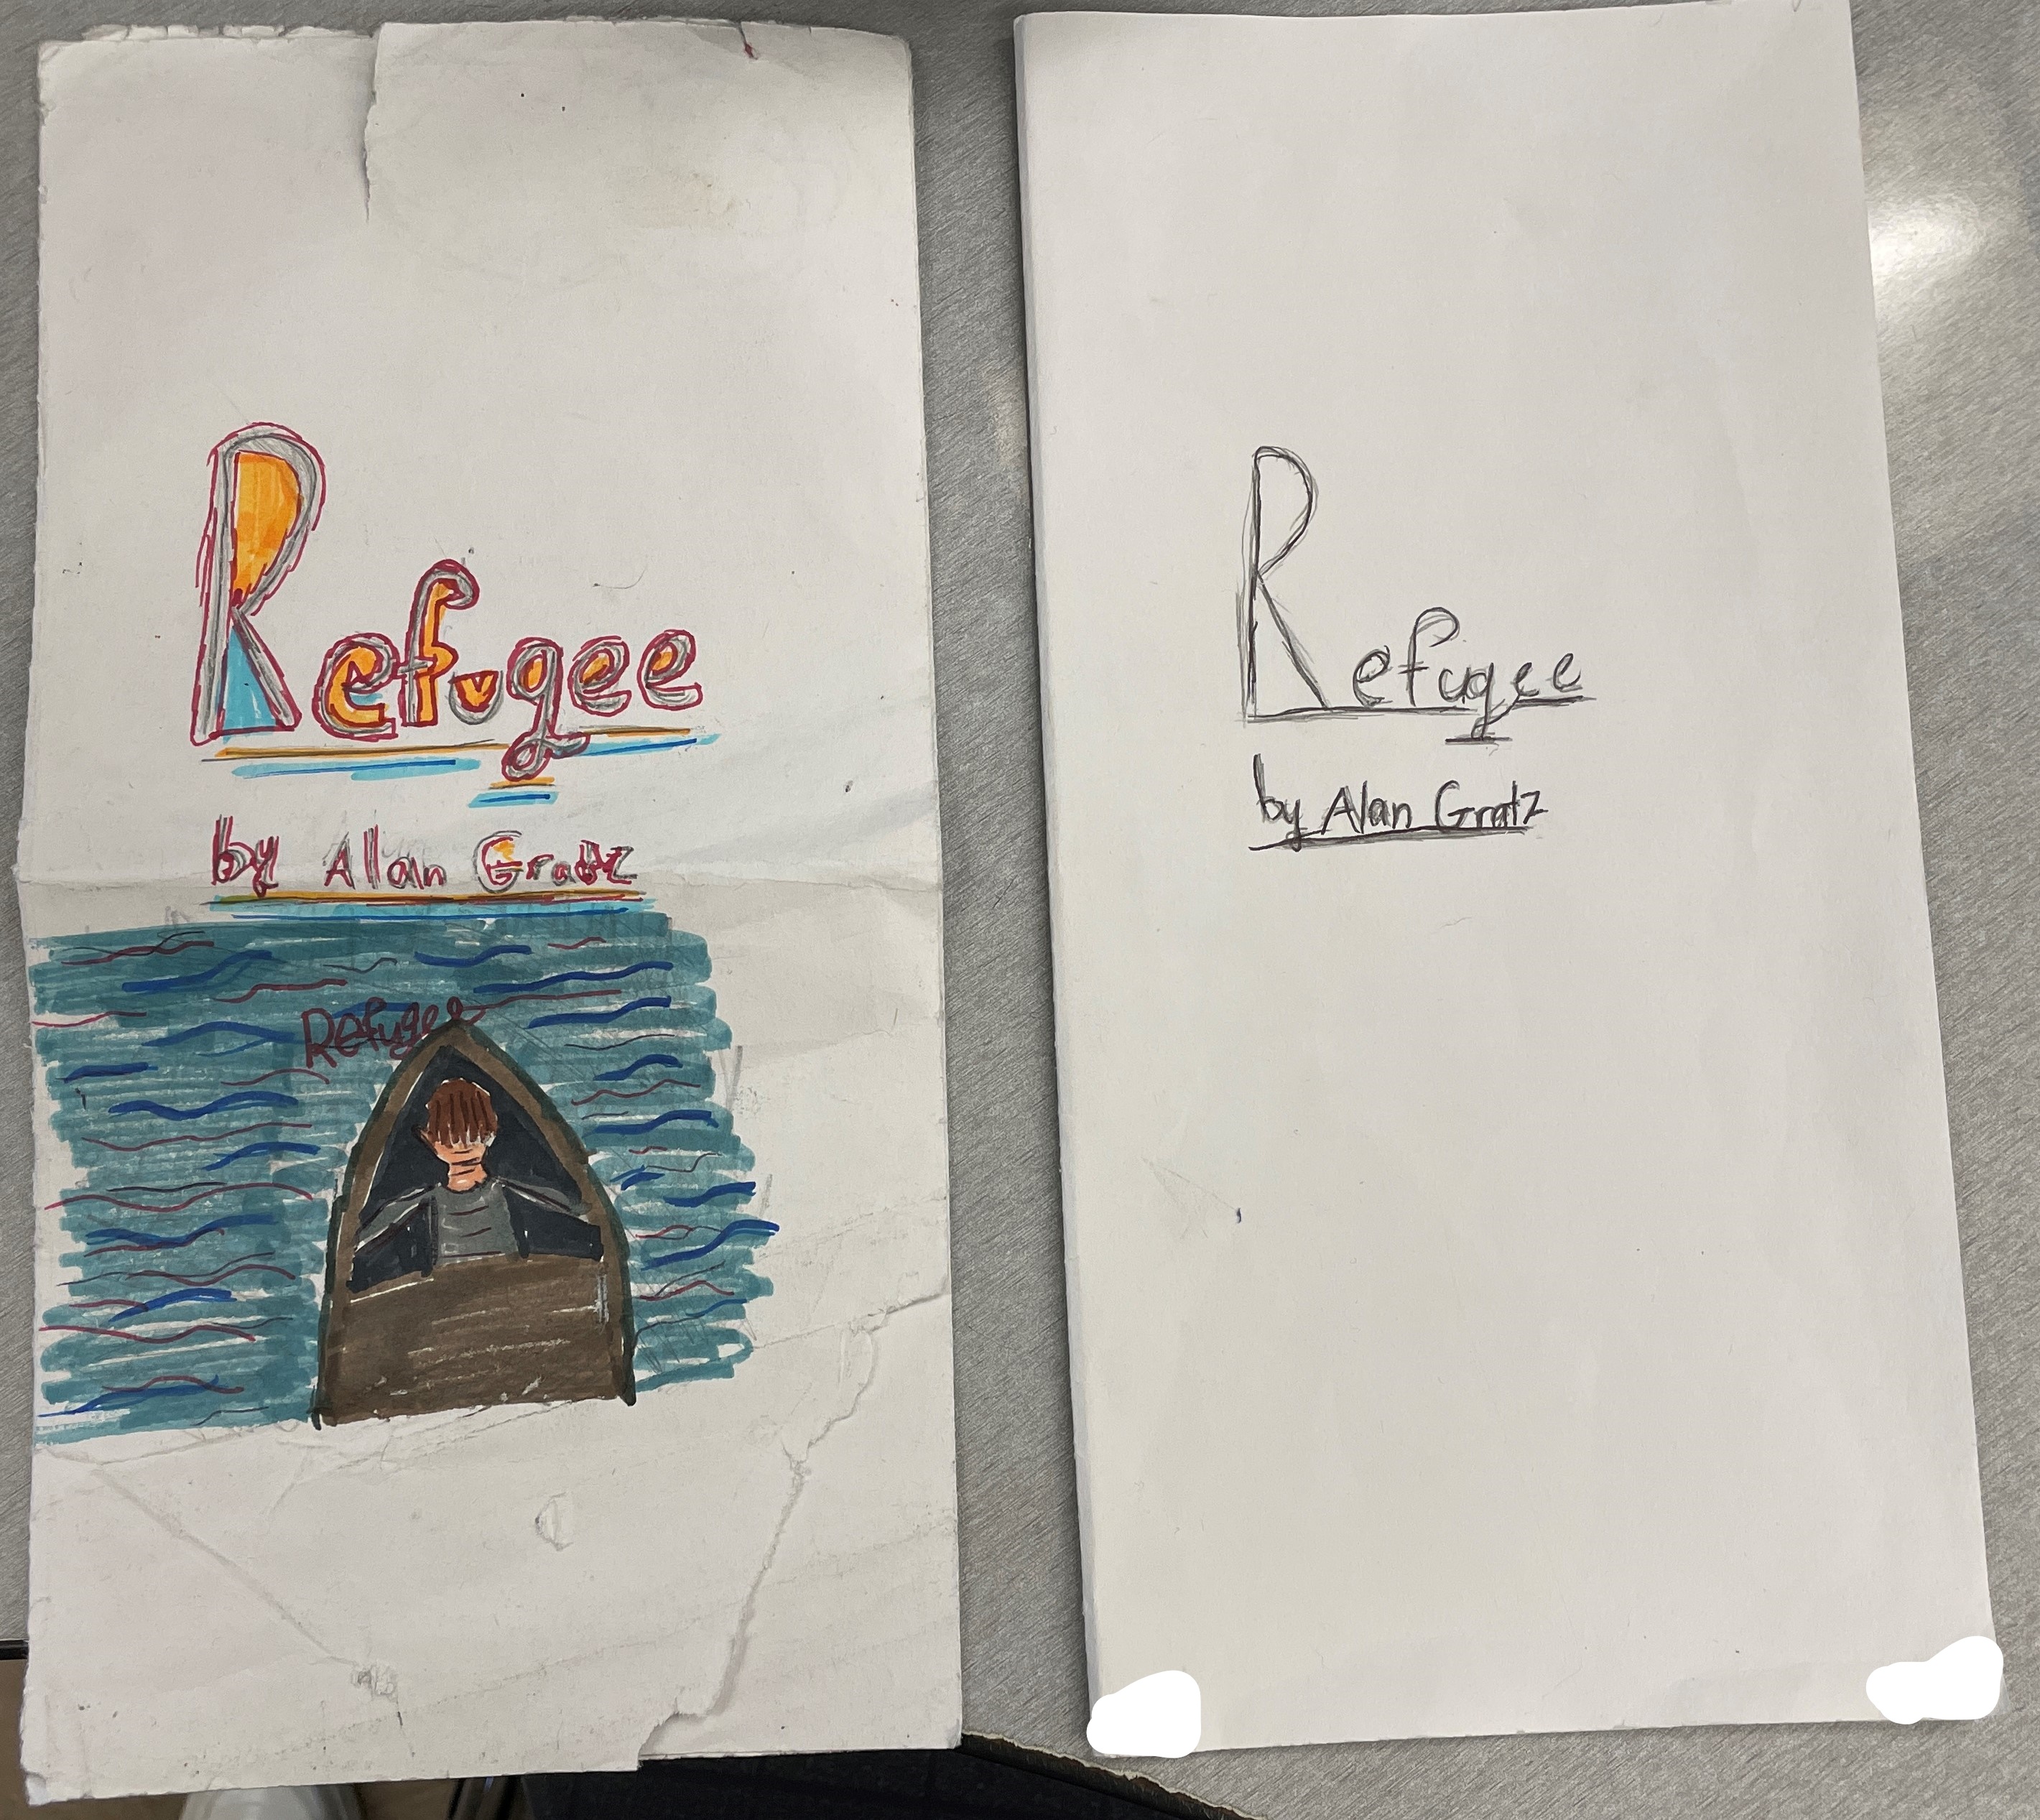 review of the book refugee